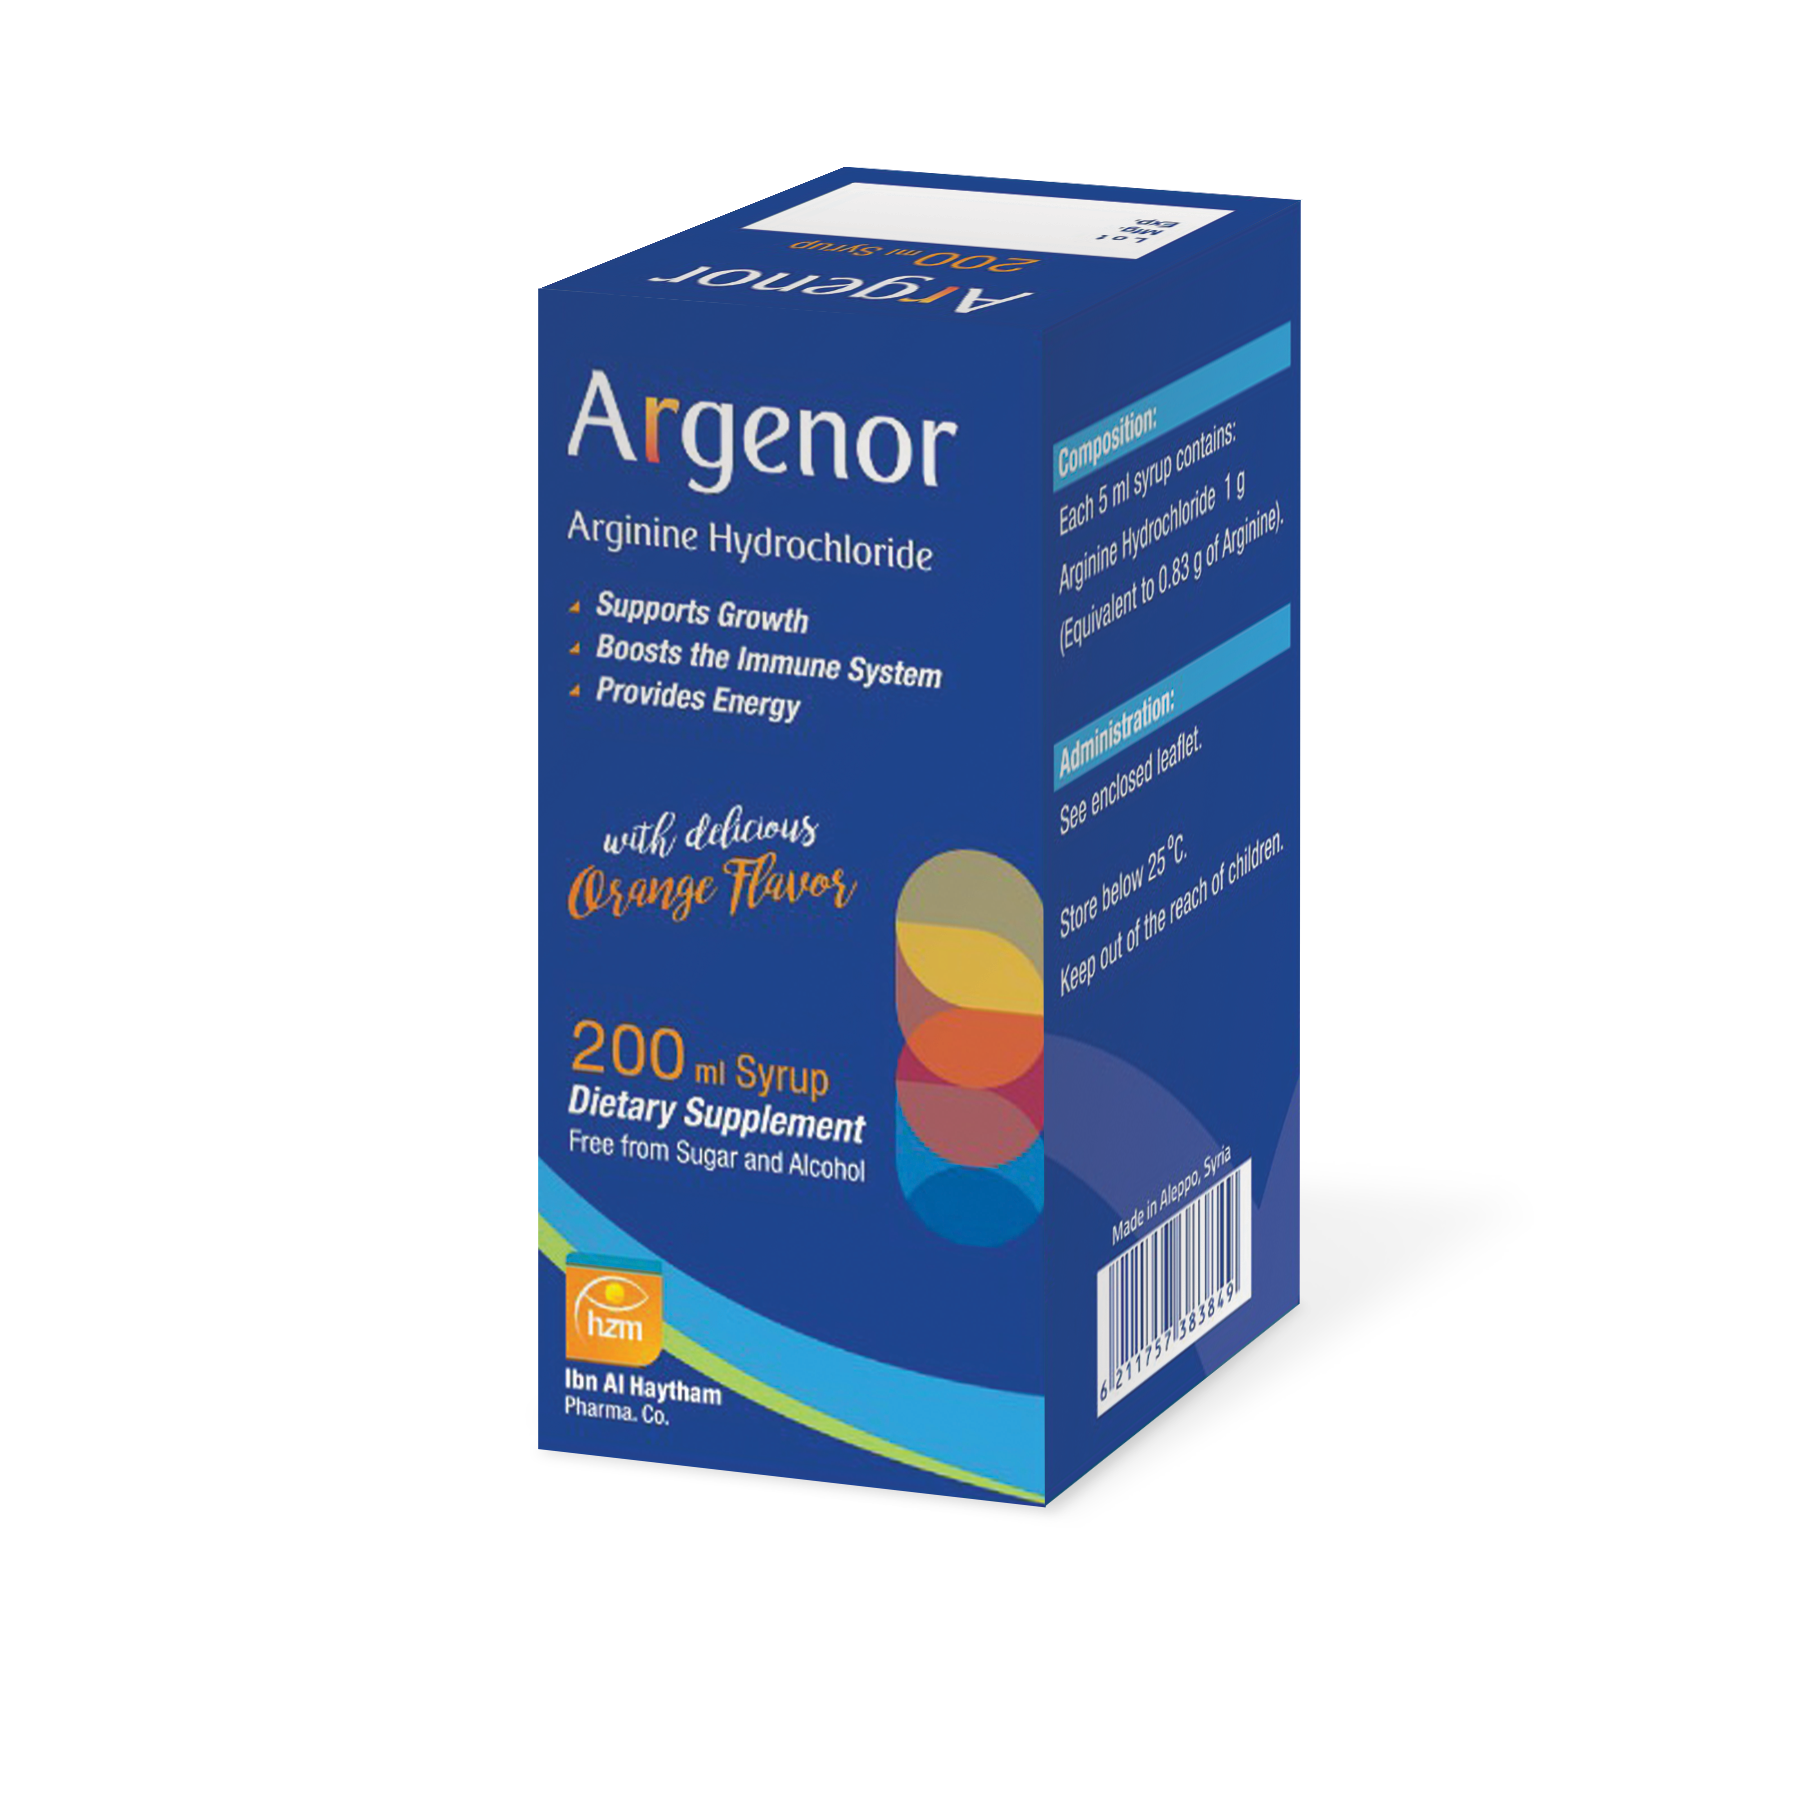 Argenor Syrup